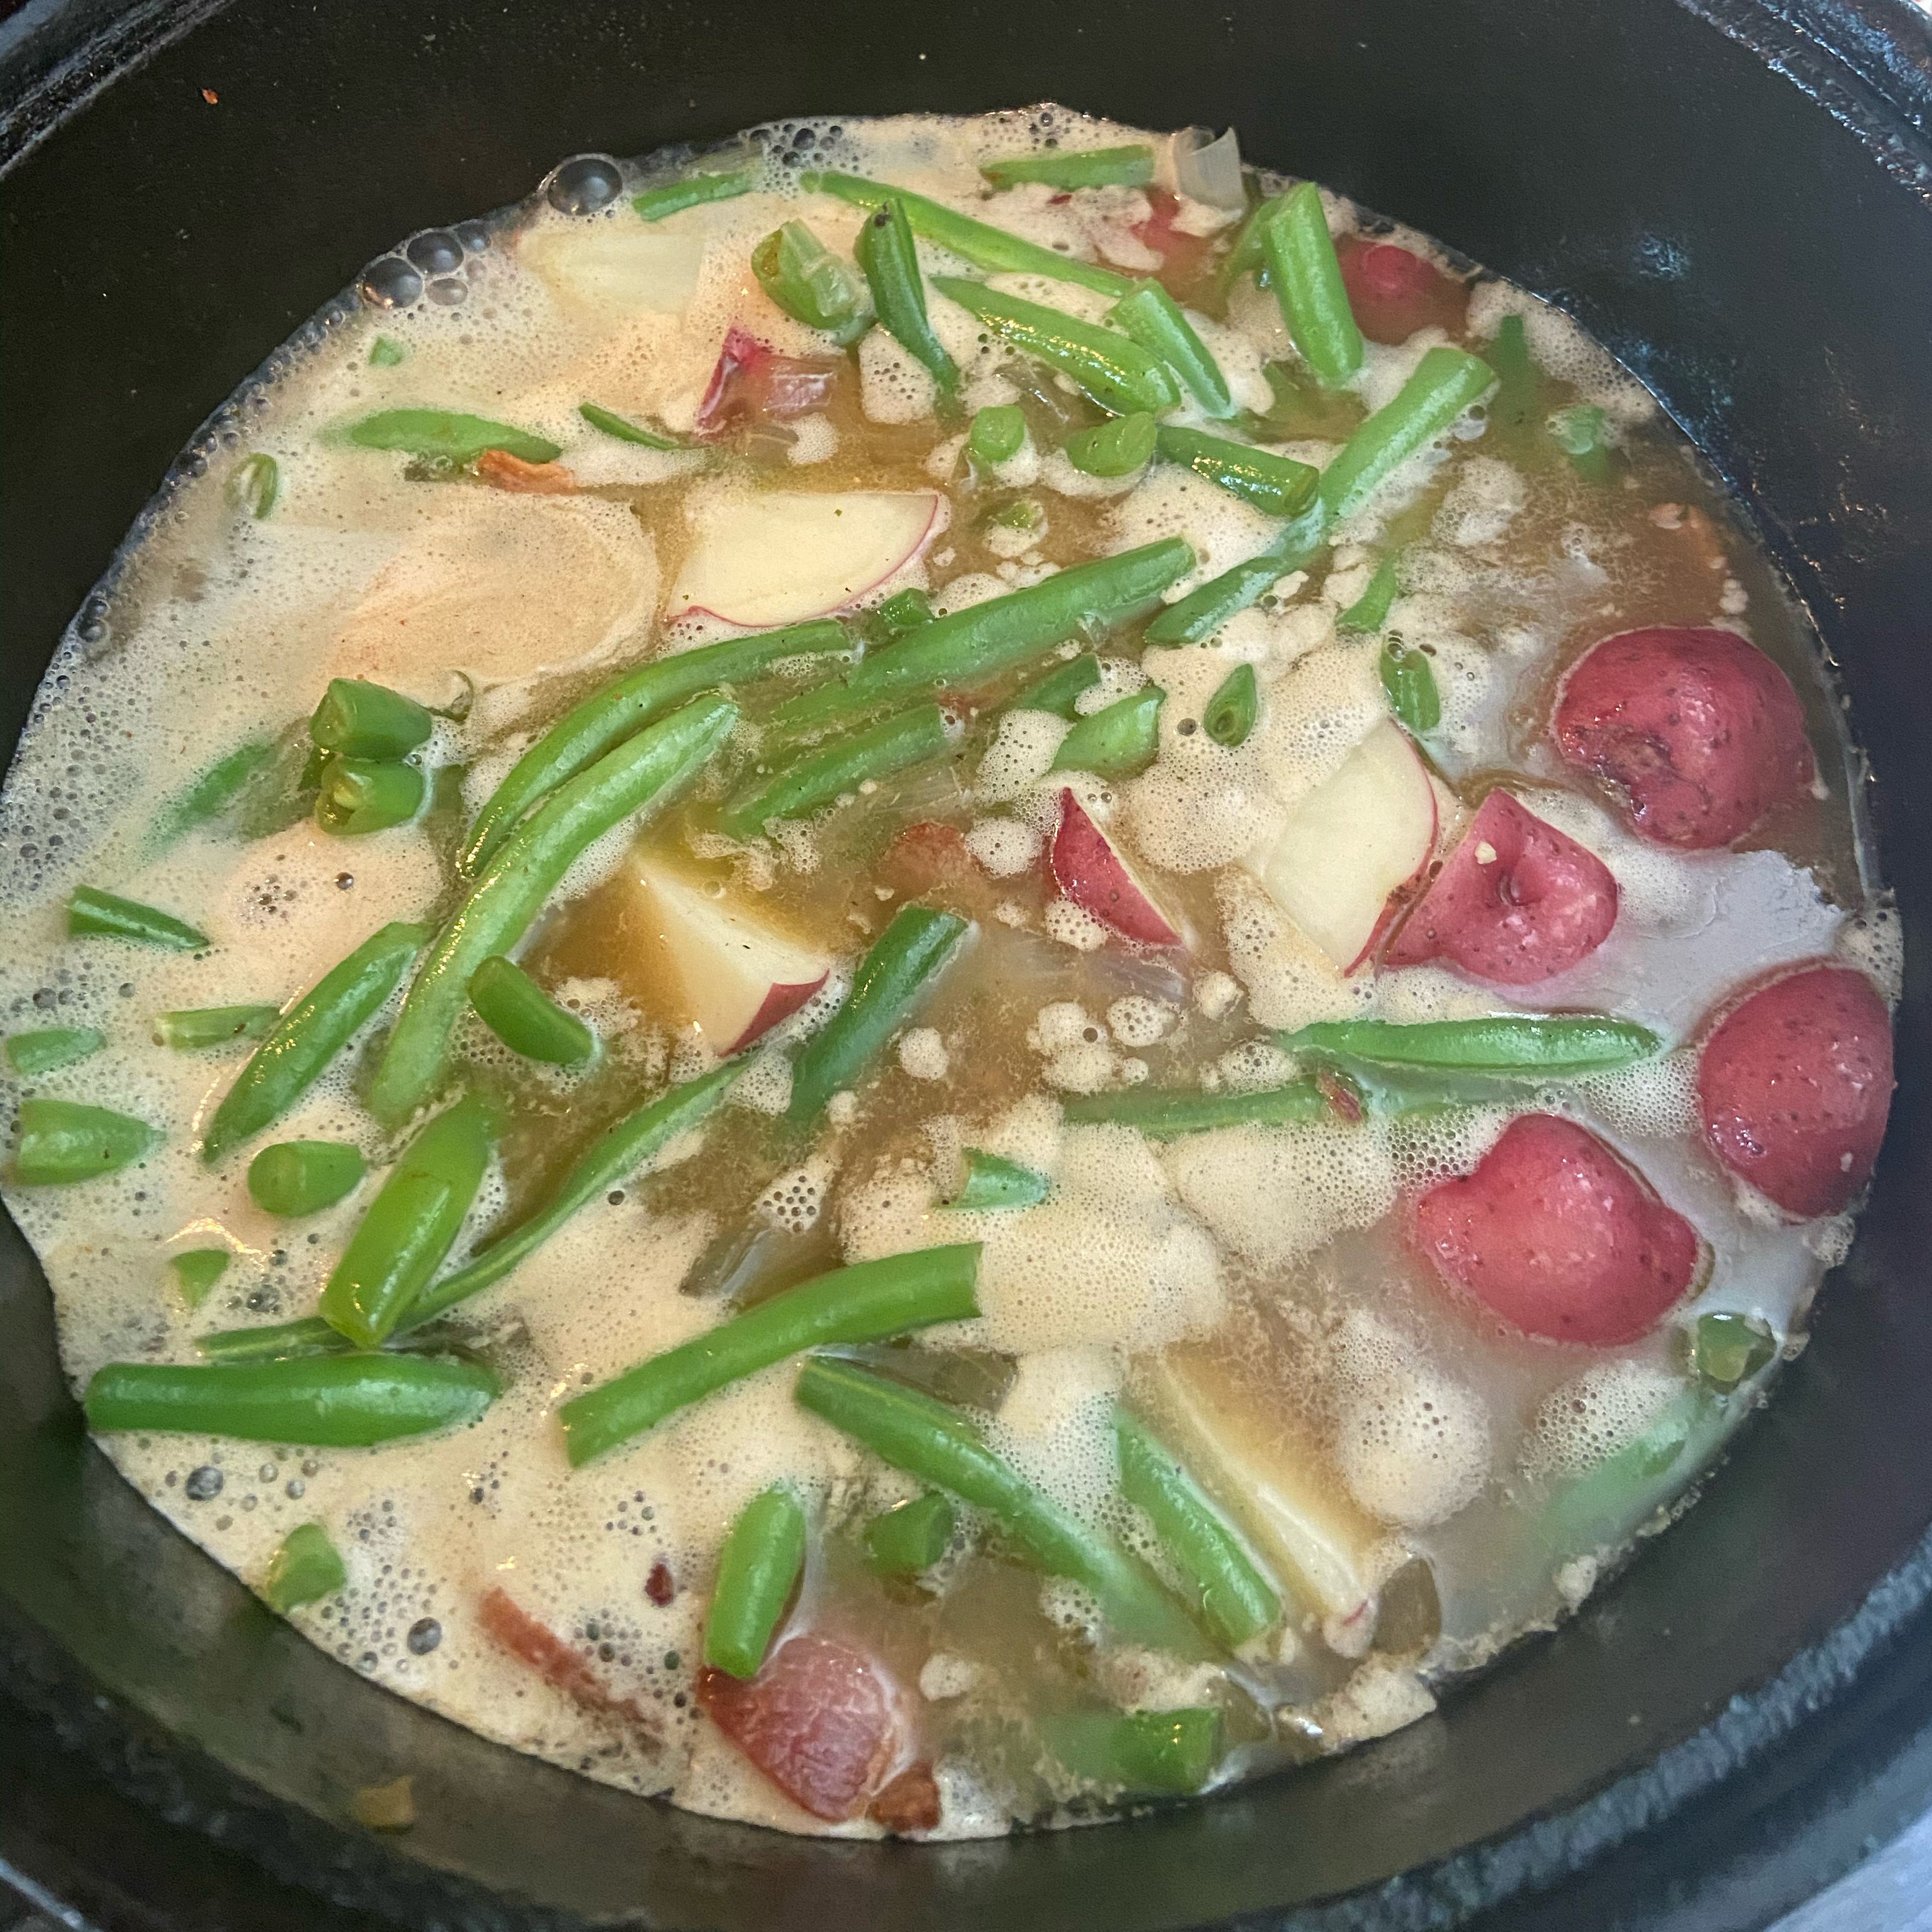 Add the Red potatoes and then add enough chicken broth to cover. Add in the butter and salt and pepper to taste. Remember bacon can be salty so you might want to give the broth a quick taste and then add your salt accordingly.￼